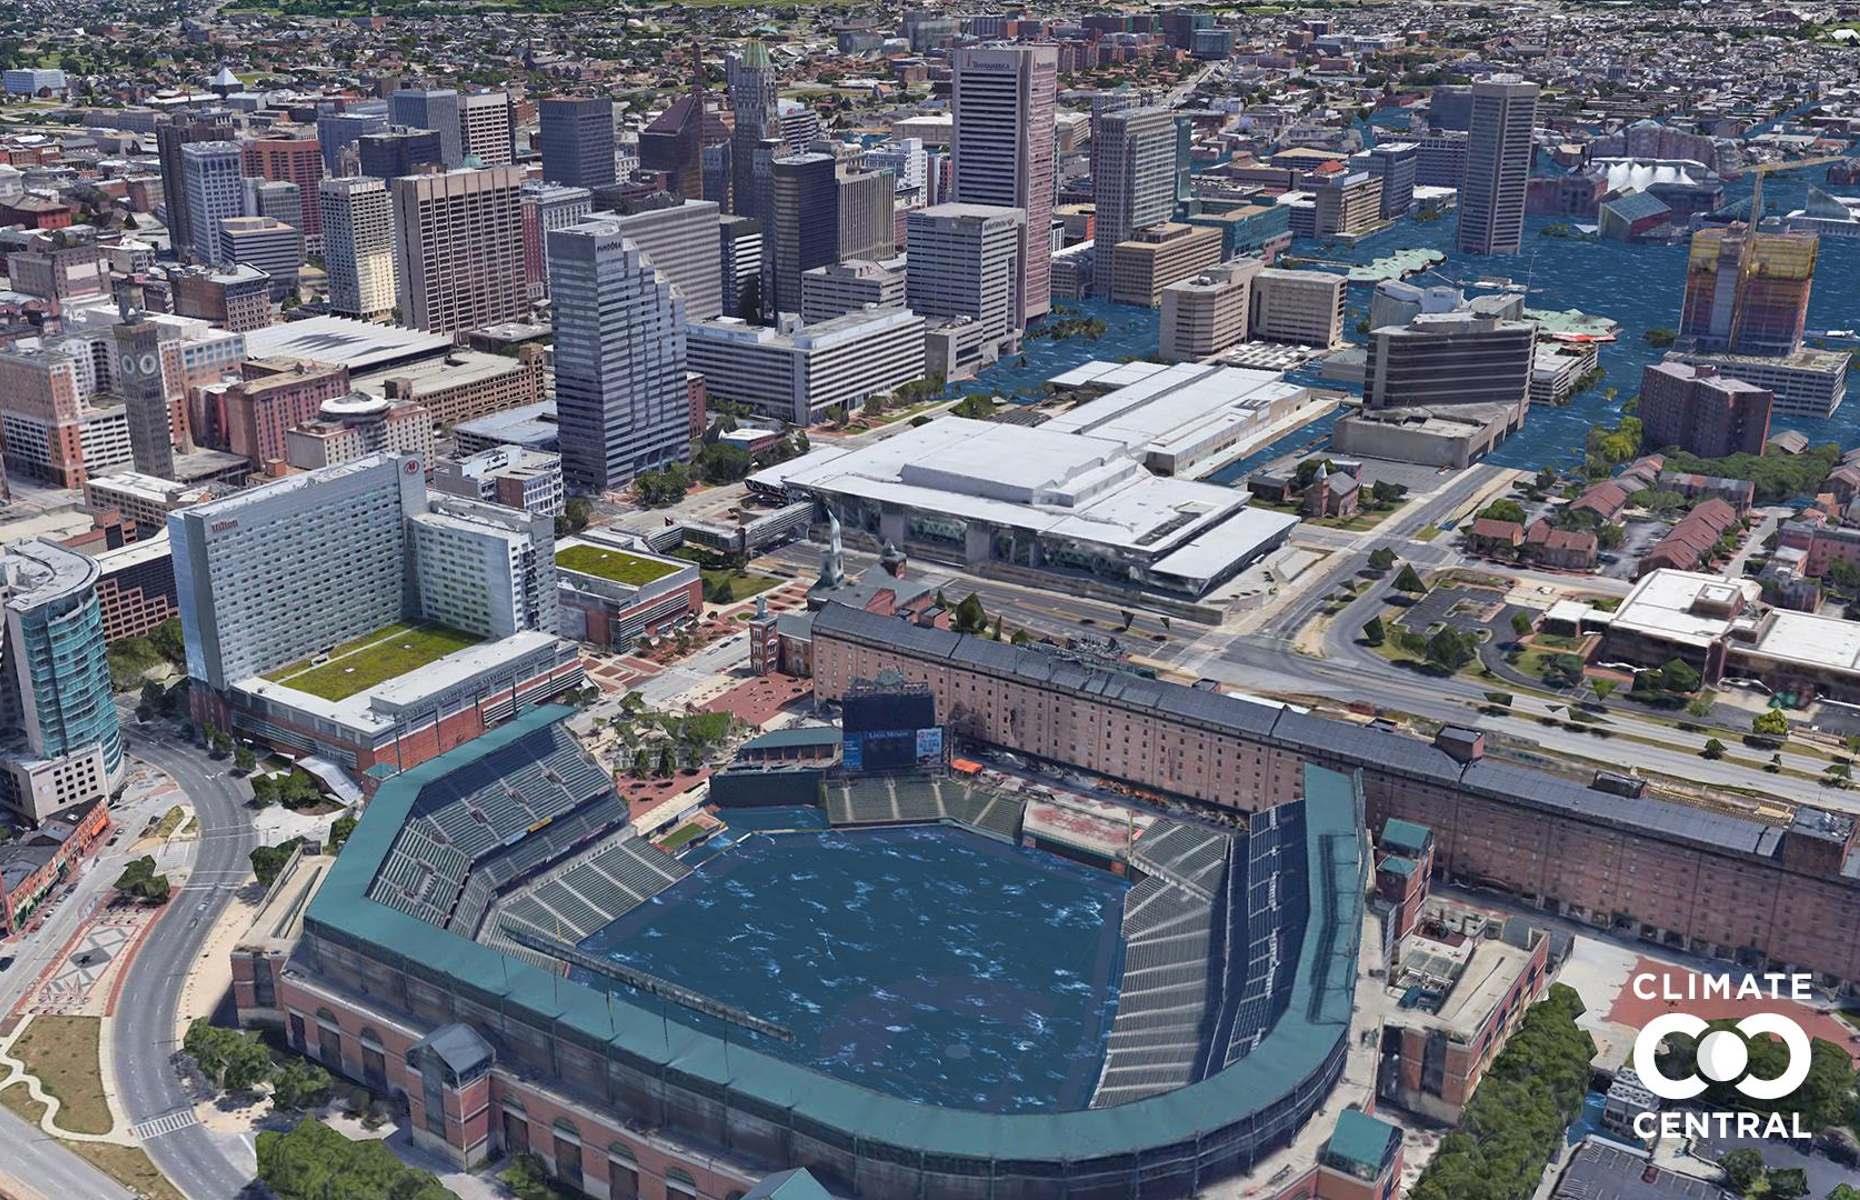 Its location on the banks of the Patapsco River makes Baltimore, Maryland vulnerable to rising sea levels, as you can see from this image of the Convention Center. The grass-covered stadium would be filled with water, along with swathes of downtown.